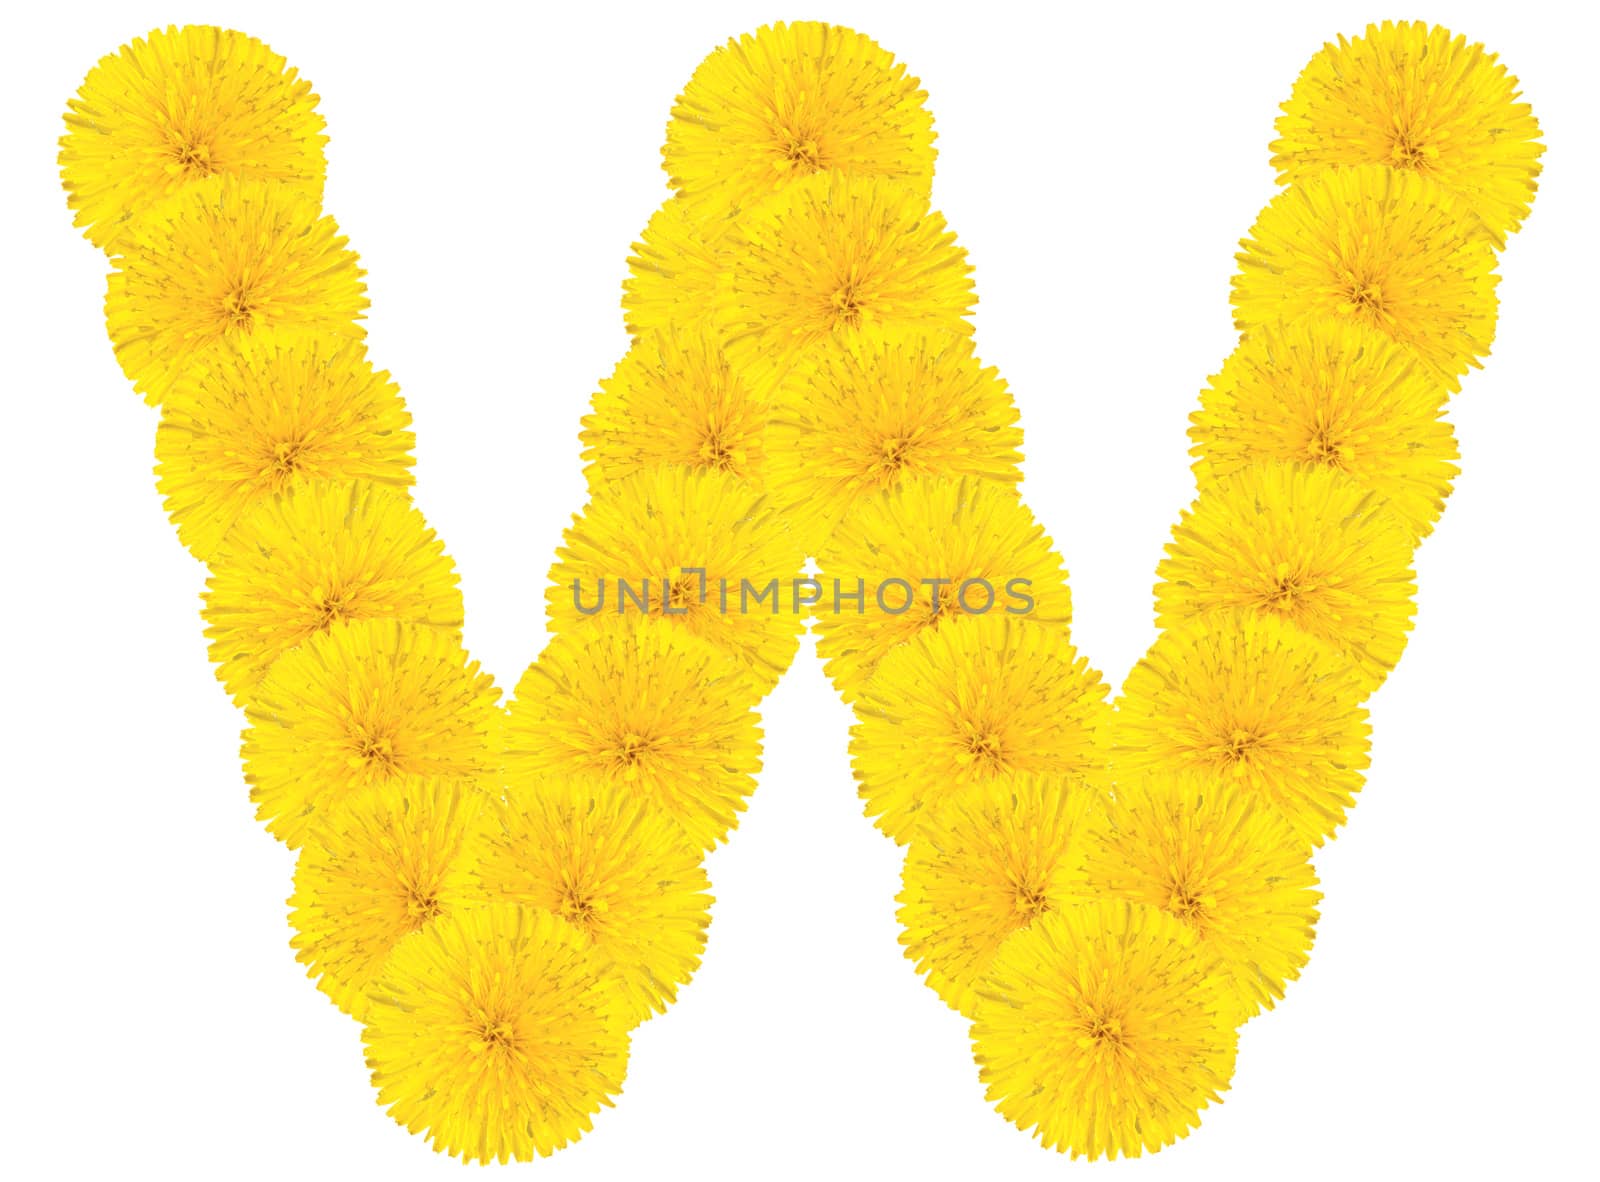 Letter V made from dandelion flowers isolated on white background